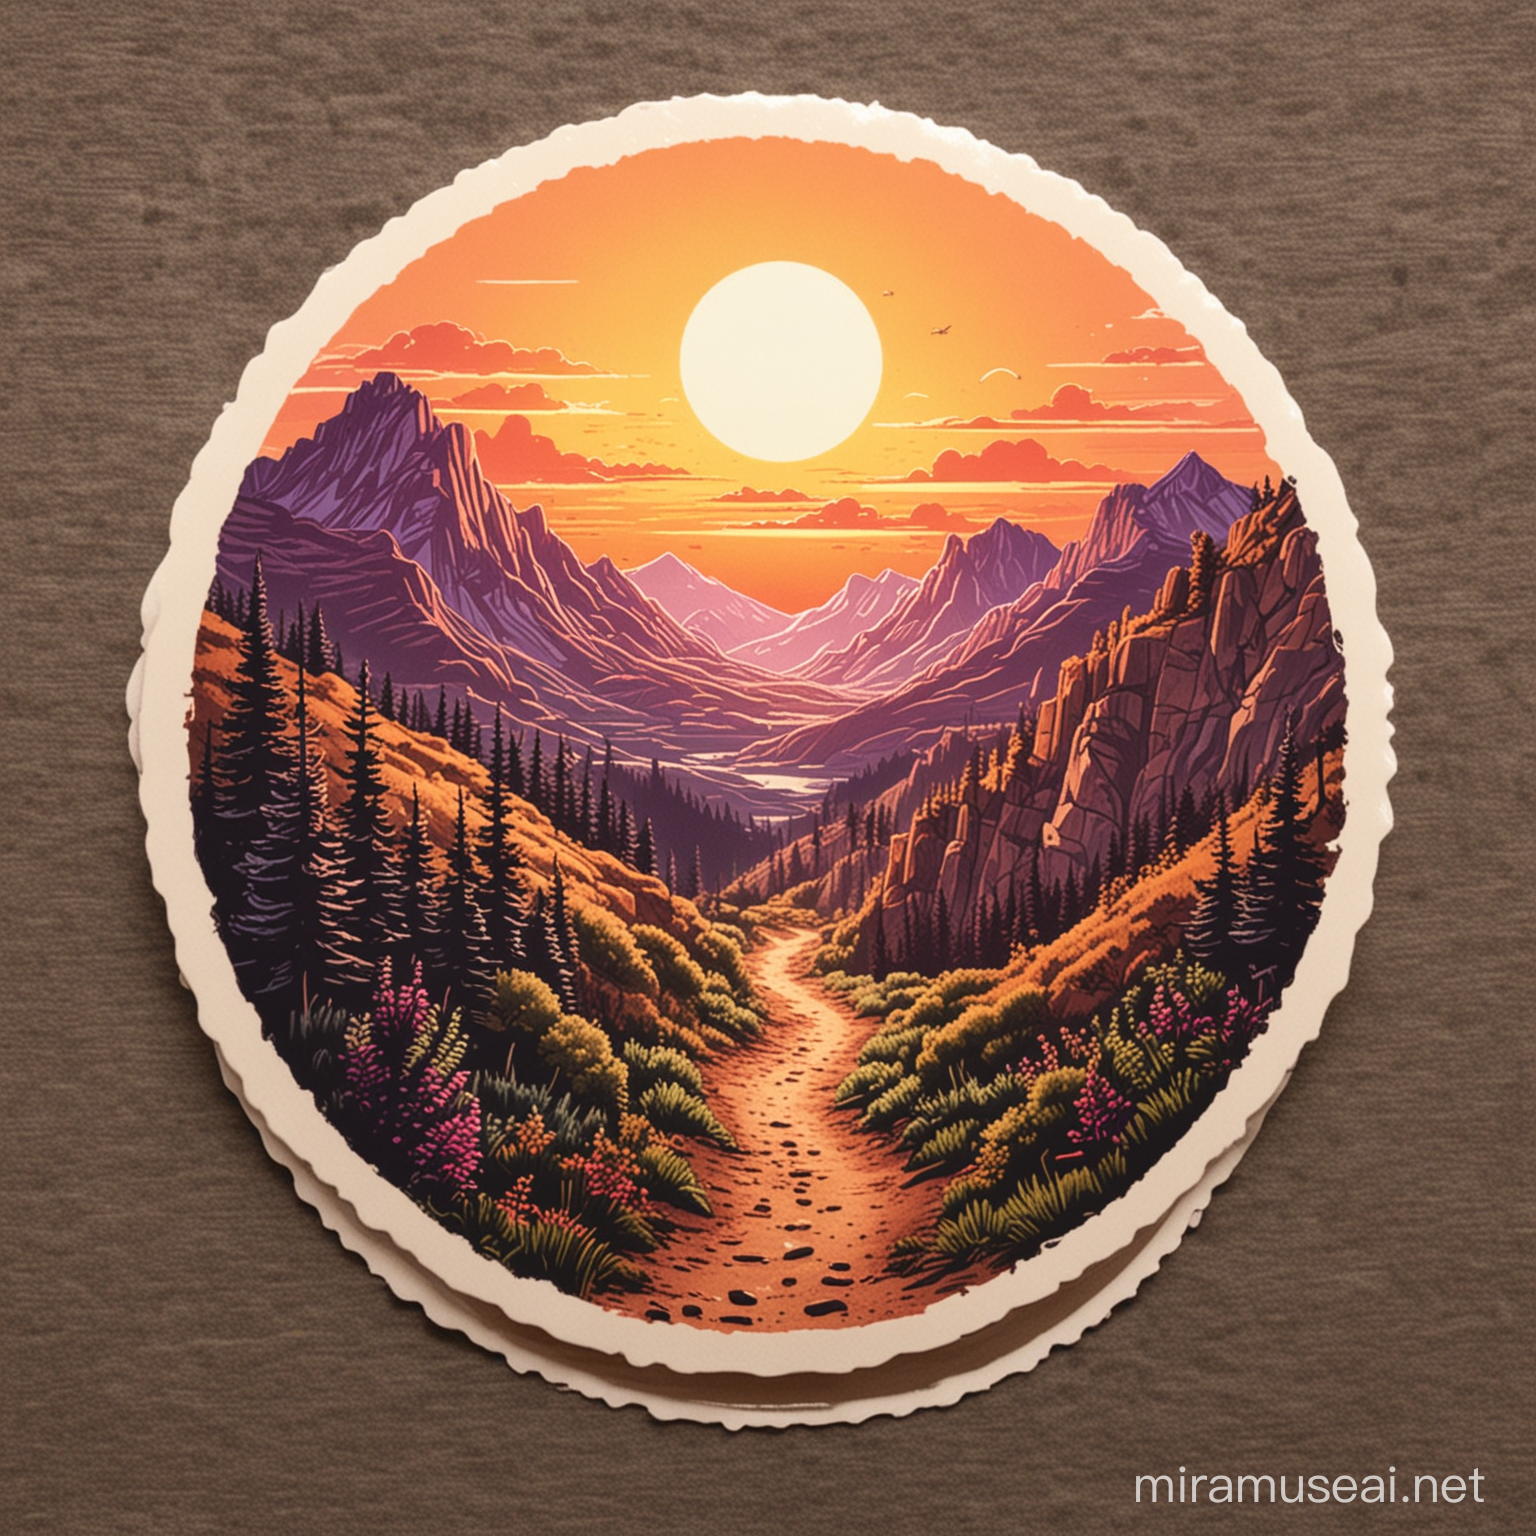 generate a sticker type image of a hiking trail with sunset in the background